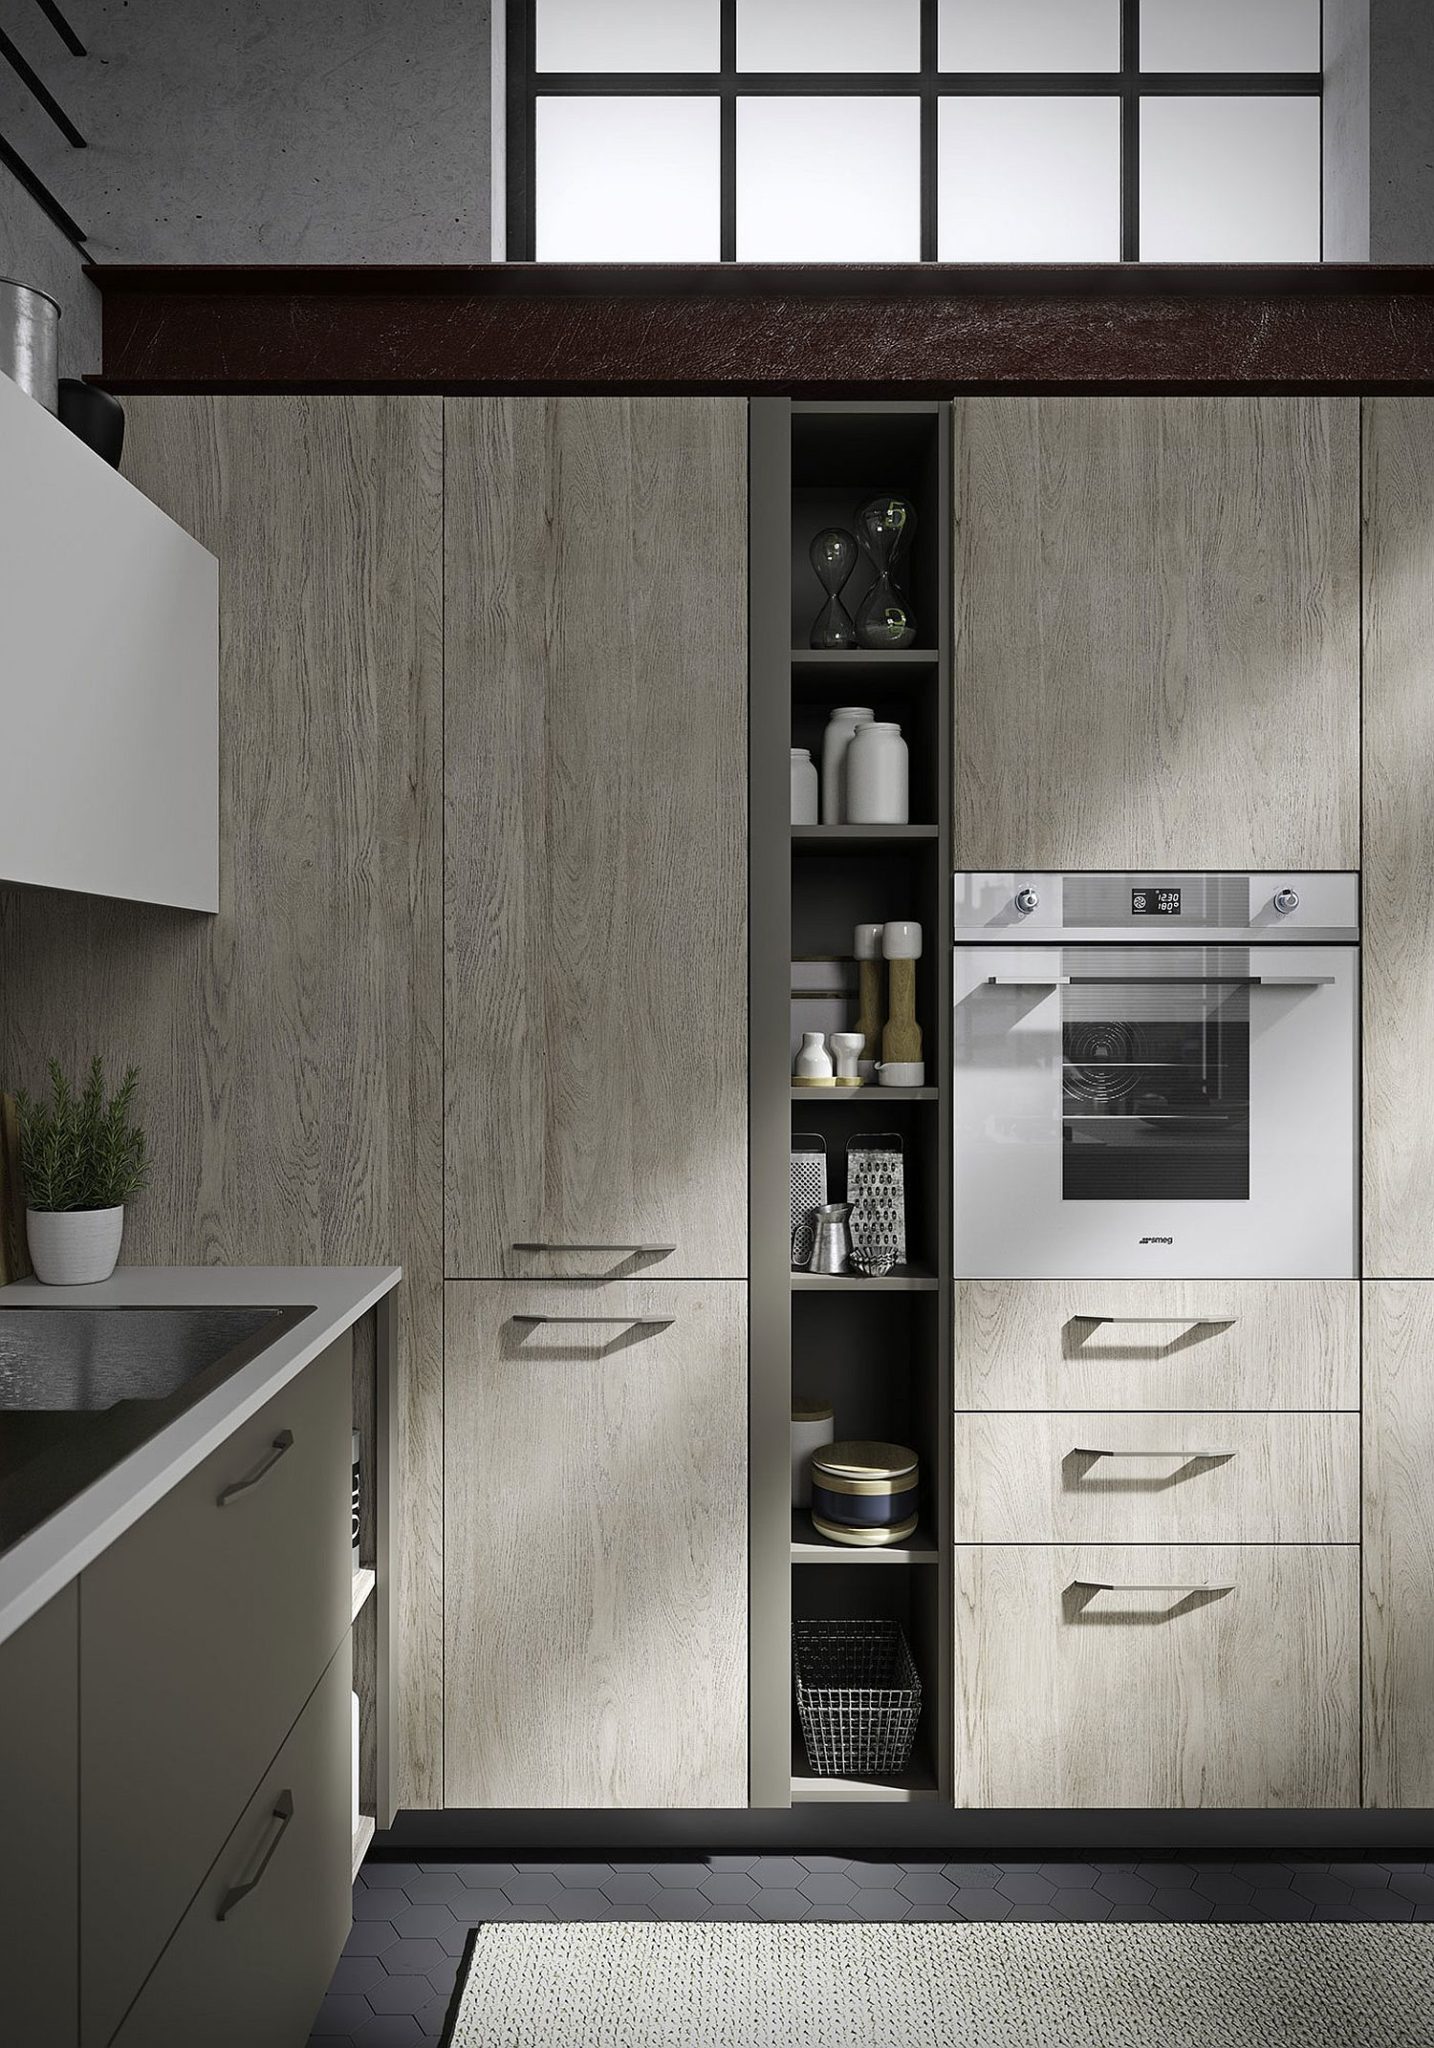 Refined, Reliable and Edgy: FUN Adaptable Kitchen by Snaidero